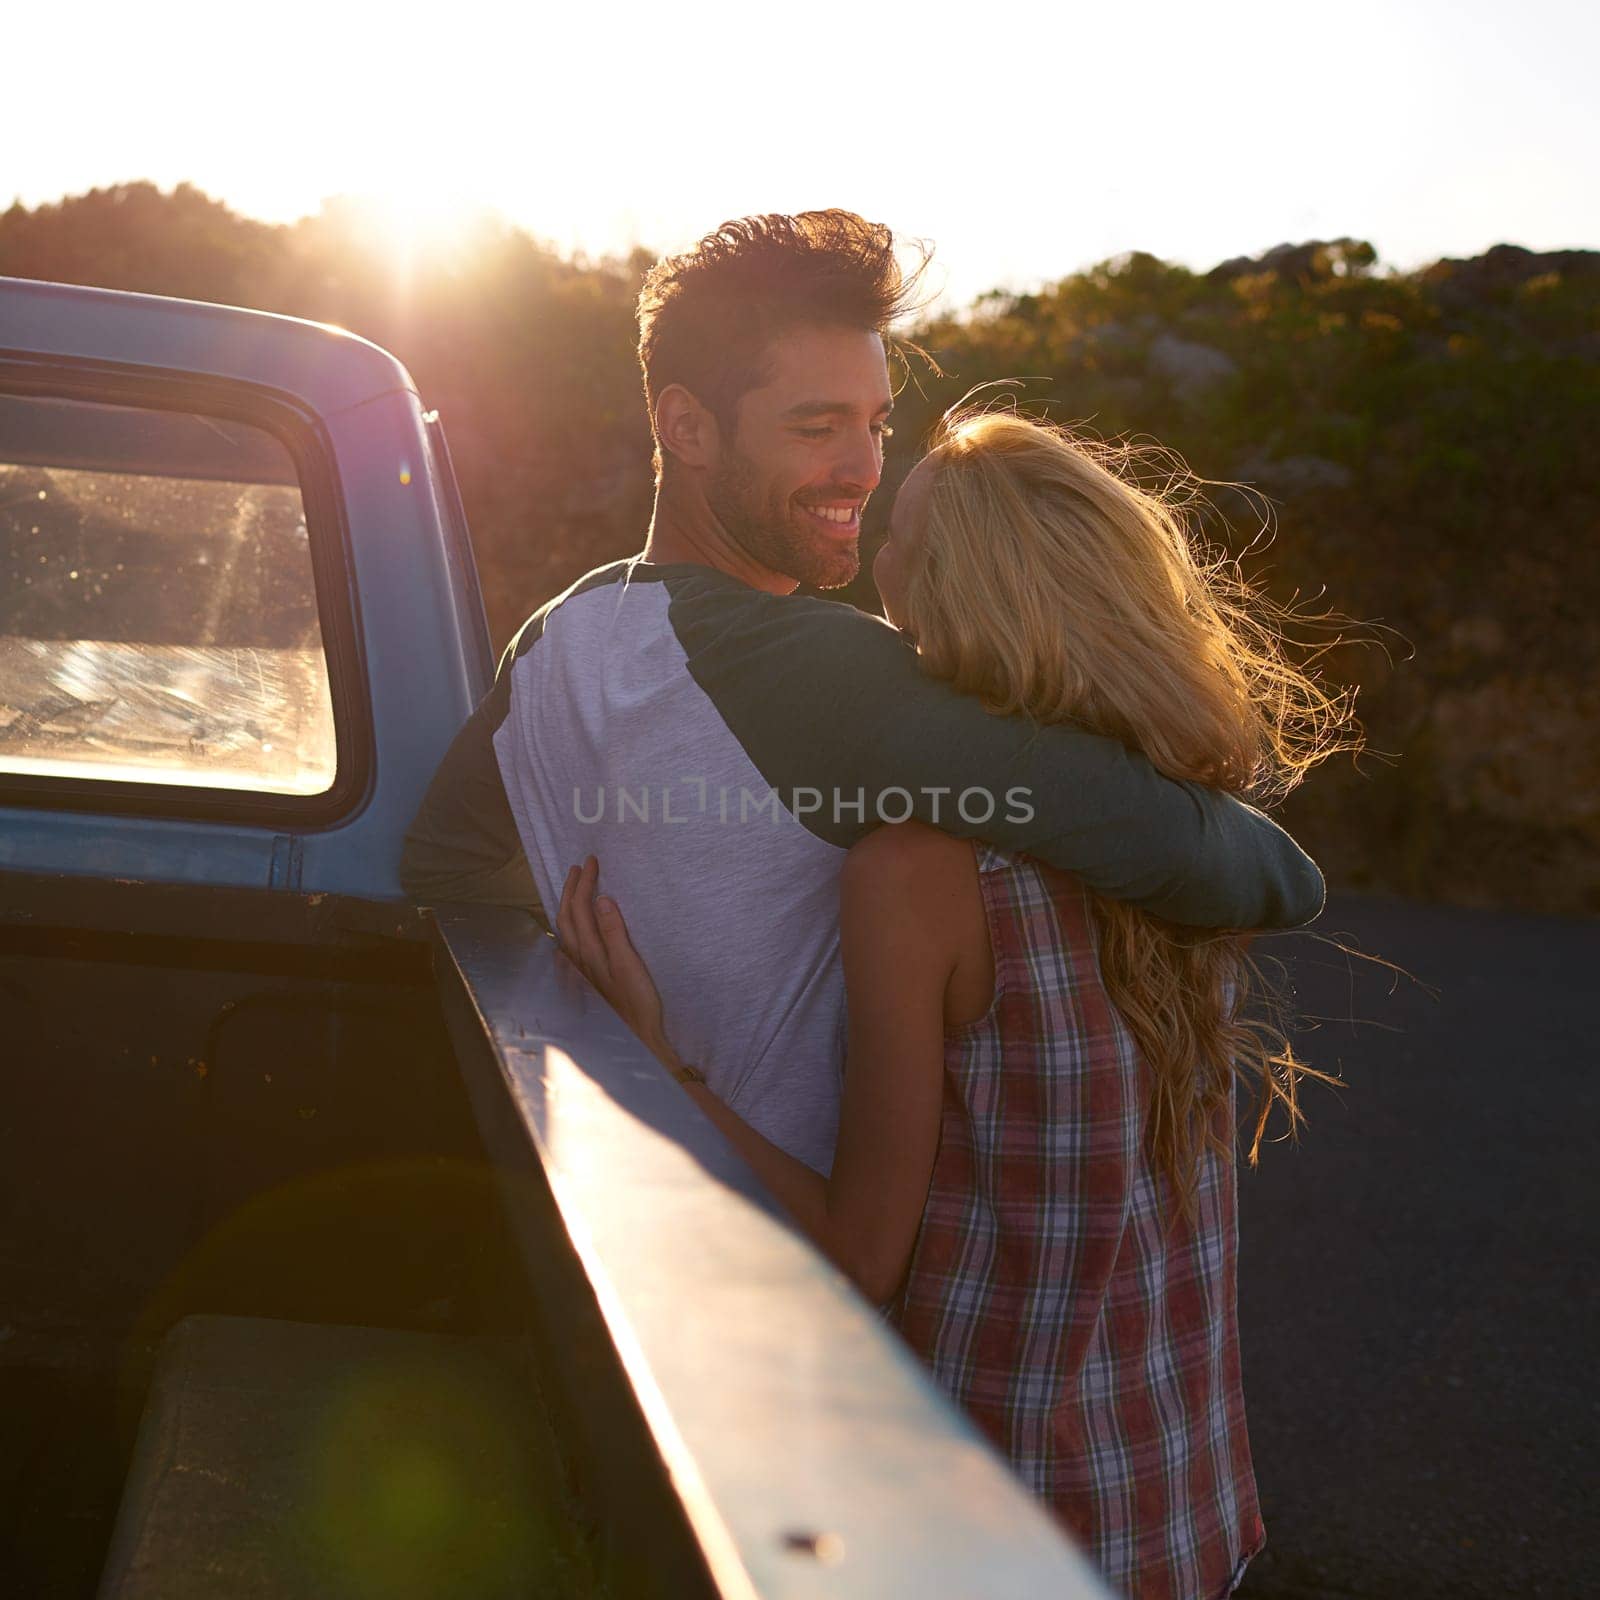 Hug, truck or happy couple on road trip in nature on romantic holiday vacation for bonding on date. Car, travel or people hugging to embrace on fun summer weekend break with romance in park together.